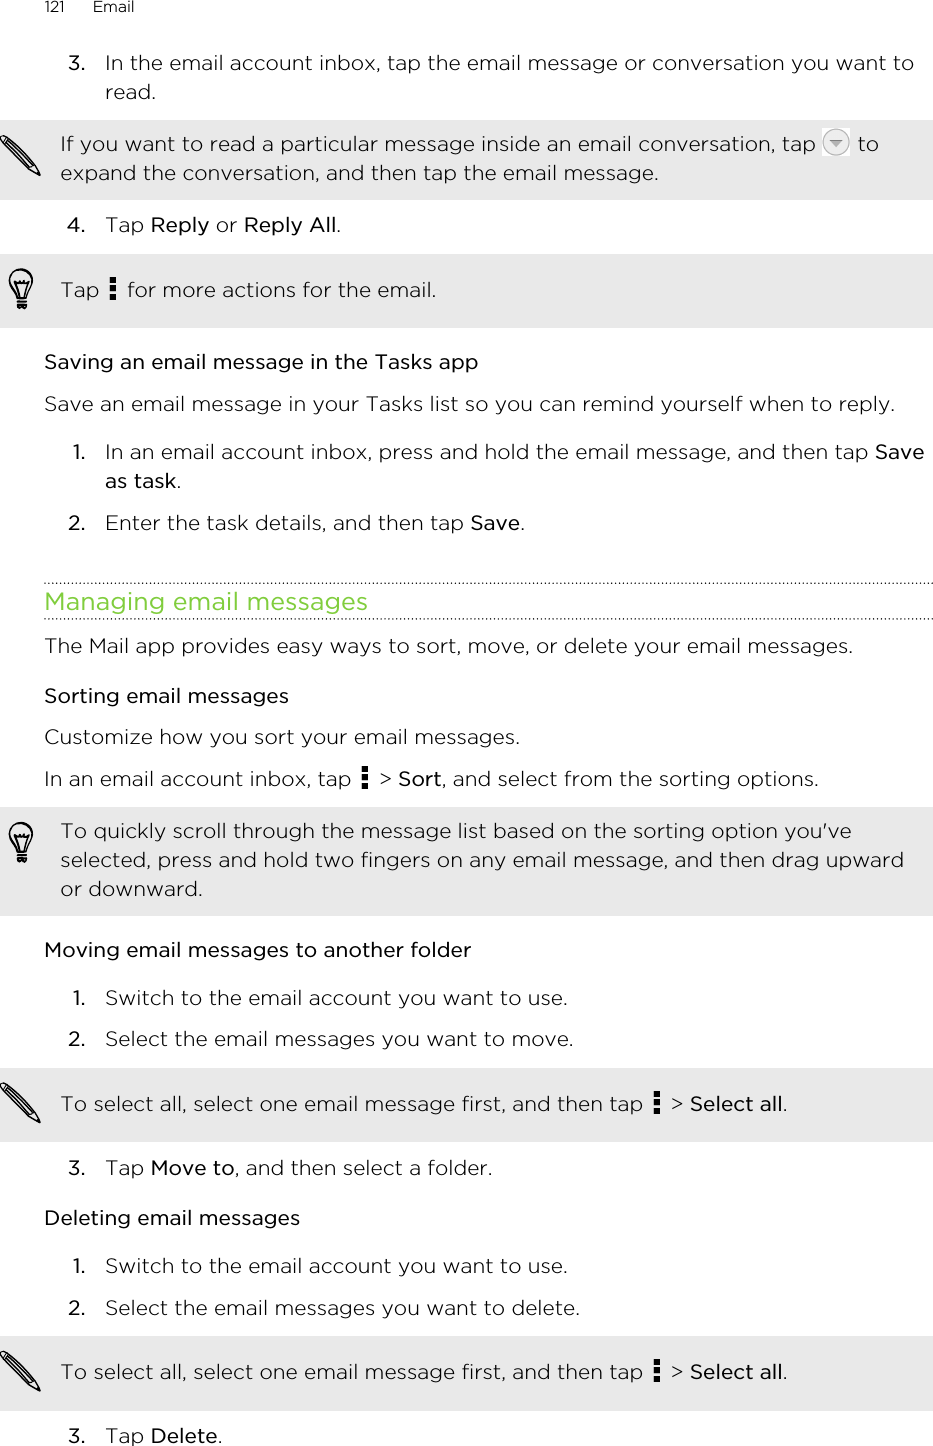 3. In the email account inbox, tap the email message or conversation you want toread. If you want to read a particular message inside an email conversation, tap   toexpand the conversation, and then tap the email message.4. Tap Reply or Reply All. Tap   for more actions for the email.Saving an email message in the Tasks appSave an email message in your Tasks list so you can remind yourself when to reply.1. In an email account inbox, press and hold the email message, and then tap Saveas task.2. Enter the task details, and then tap Save.Managing email messagesThe Mail app provides easy ways to sort, move, or delete your email messages.Sorting email messagesCustomize how you sort your email messages.In an email account inbox, tap   &gt; Sort, and select from the sorting options.To quickly scroll through the message list based on the sorting option you&apos;veselected, press and hold two fingers on any email message, and then drag upwardor downward.Moving email messages to another folder1. Switch to the email account you want to use.2. Select the email messages you want to move. To select all, select one email message first, and then tap   &gt; Select all.3. Tap Move to, and then select a folder.Deleting email messages1. Switch to the email account you want to use.2. Select the email messages you want to delete. To select all, select one email message first, and then tap   &gt; Select all.3. Tap Delete.121 Email